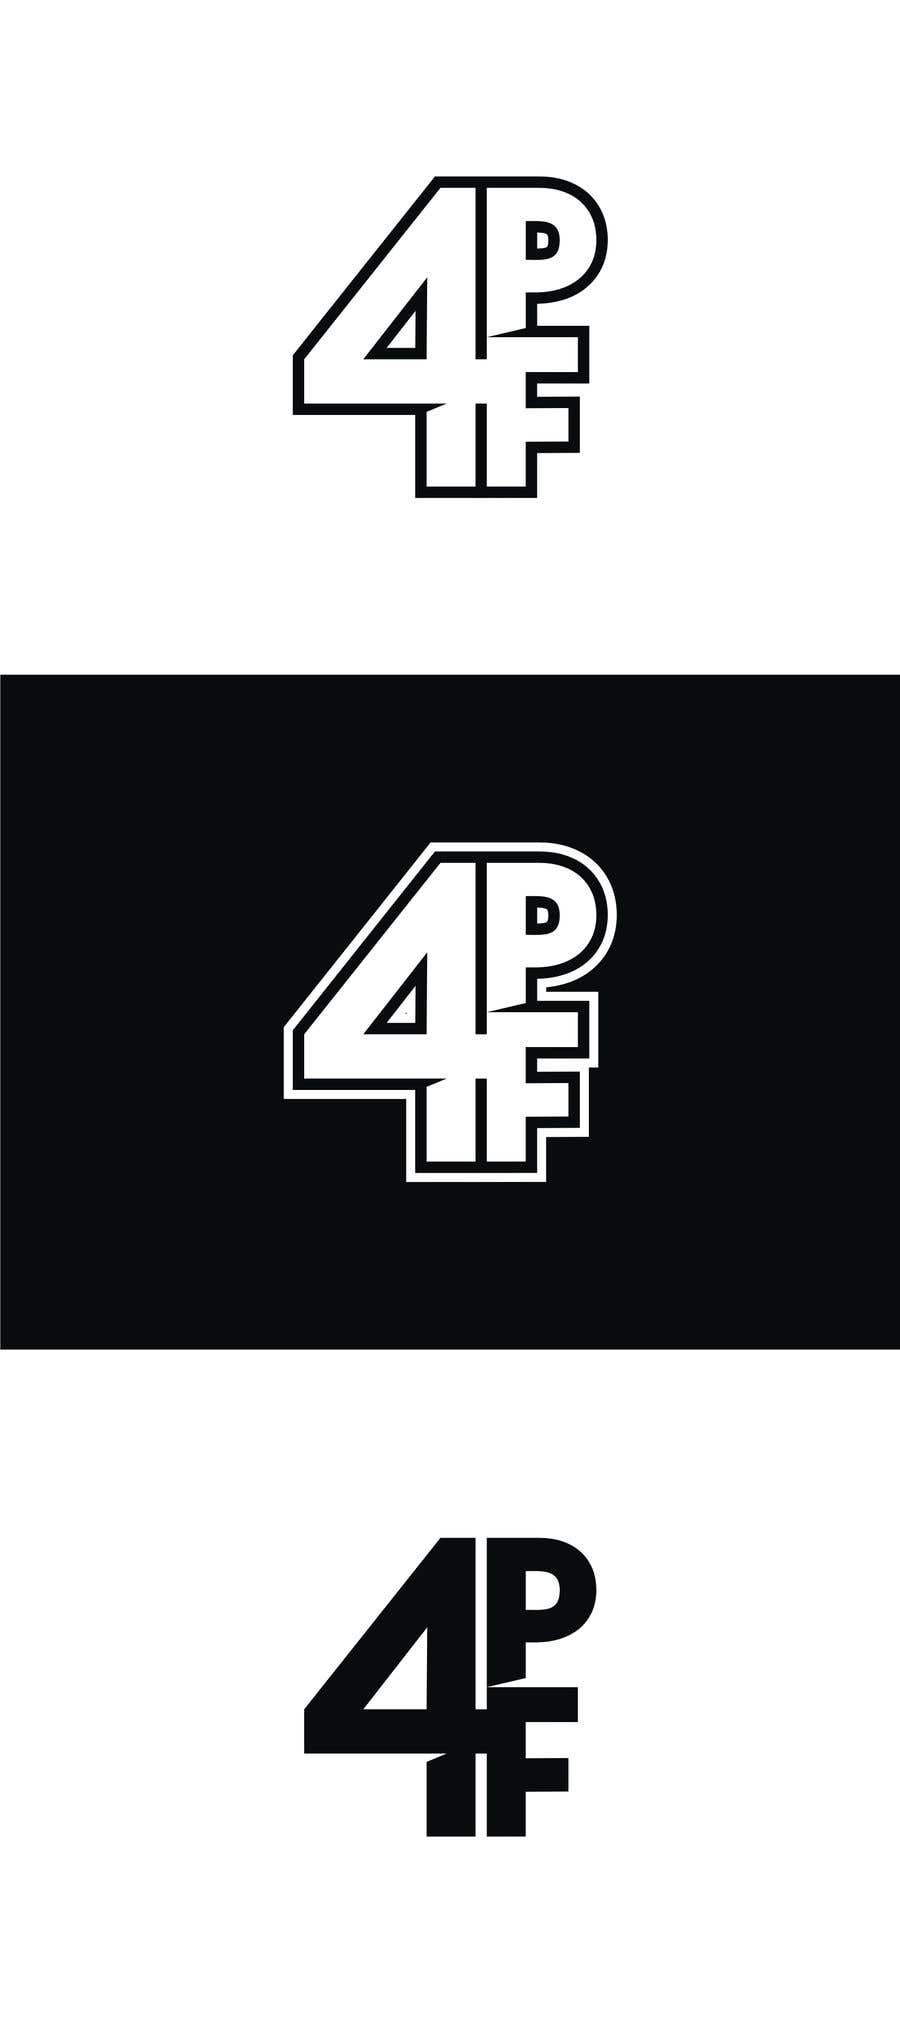 Entry by sulkhan16 for 4PF Logo